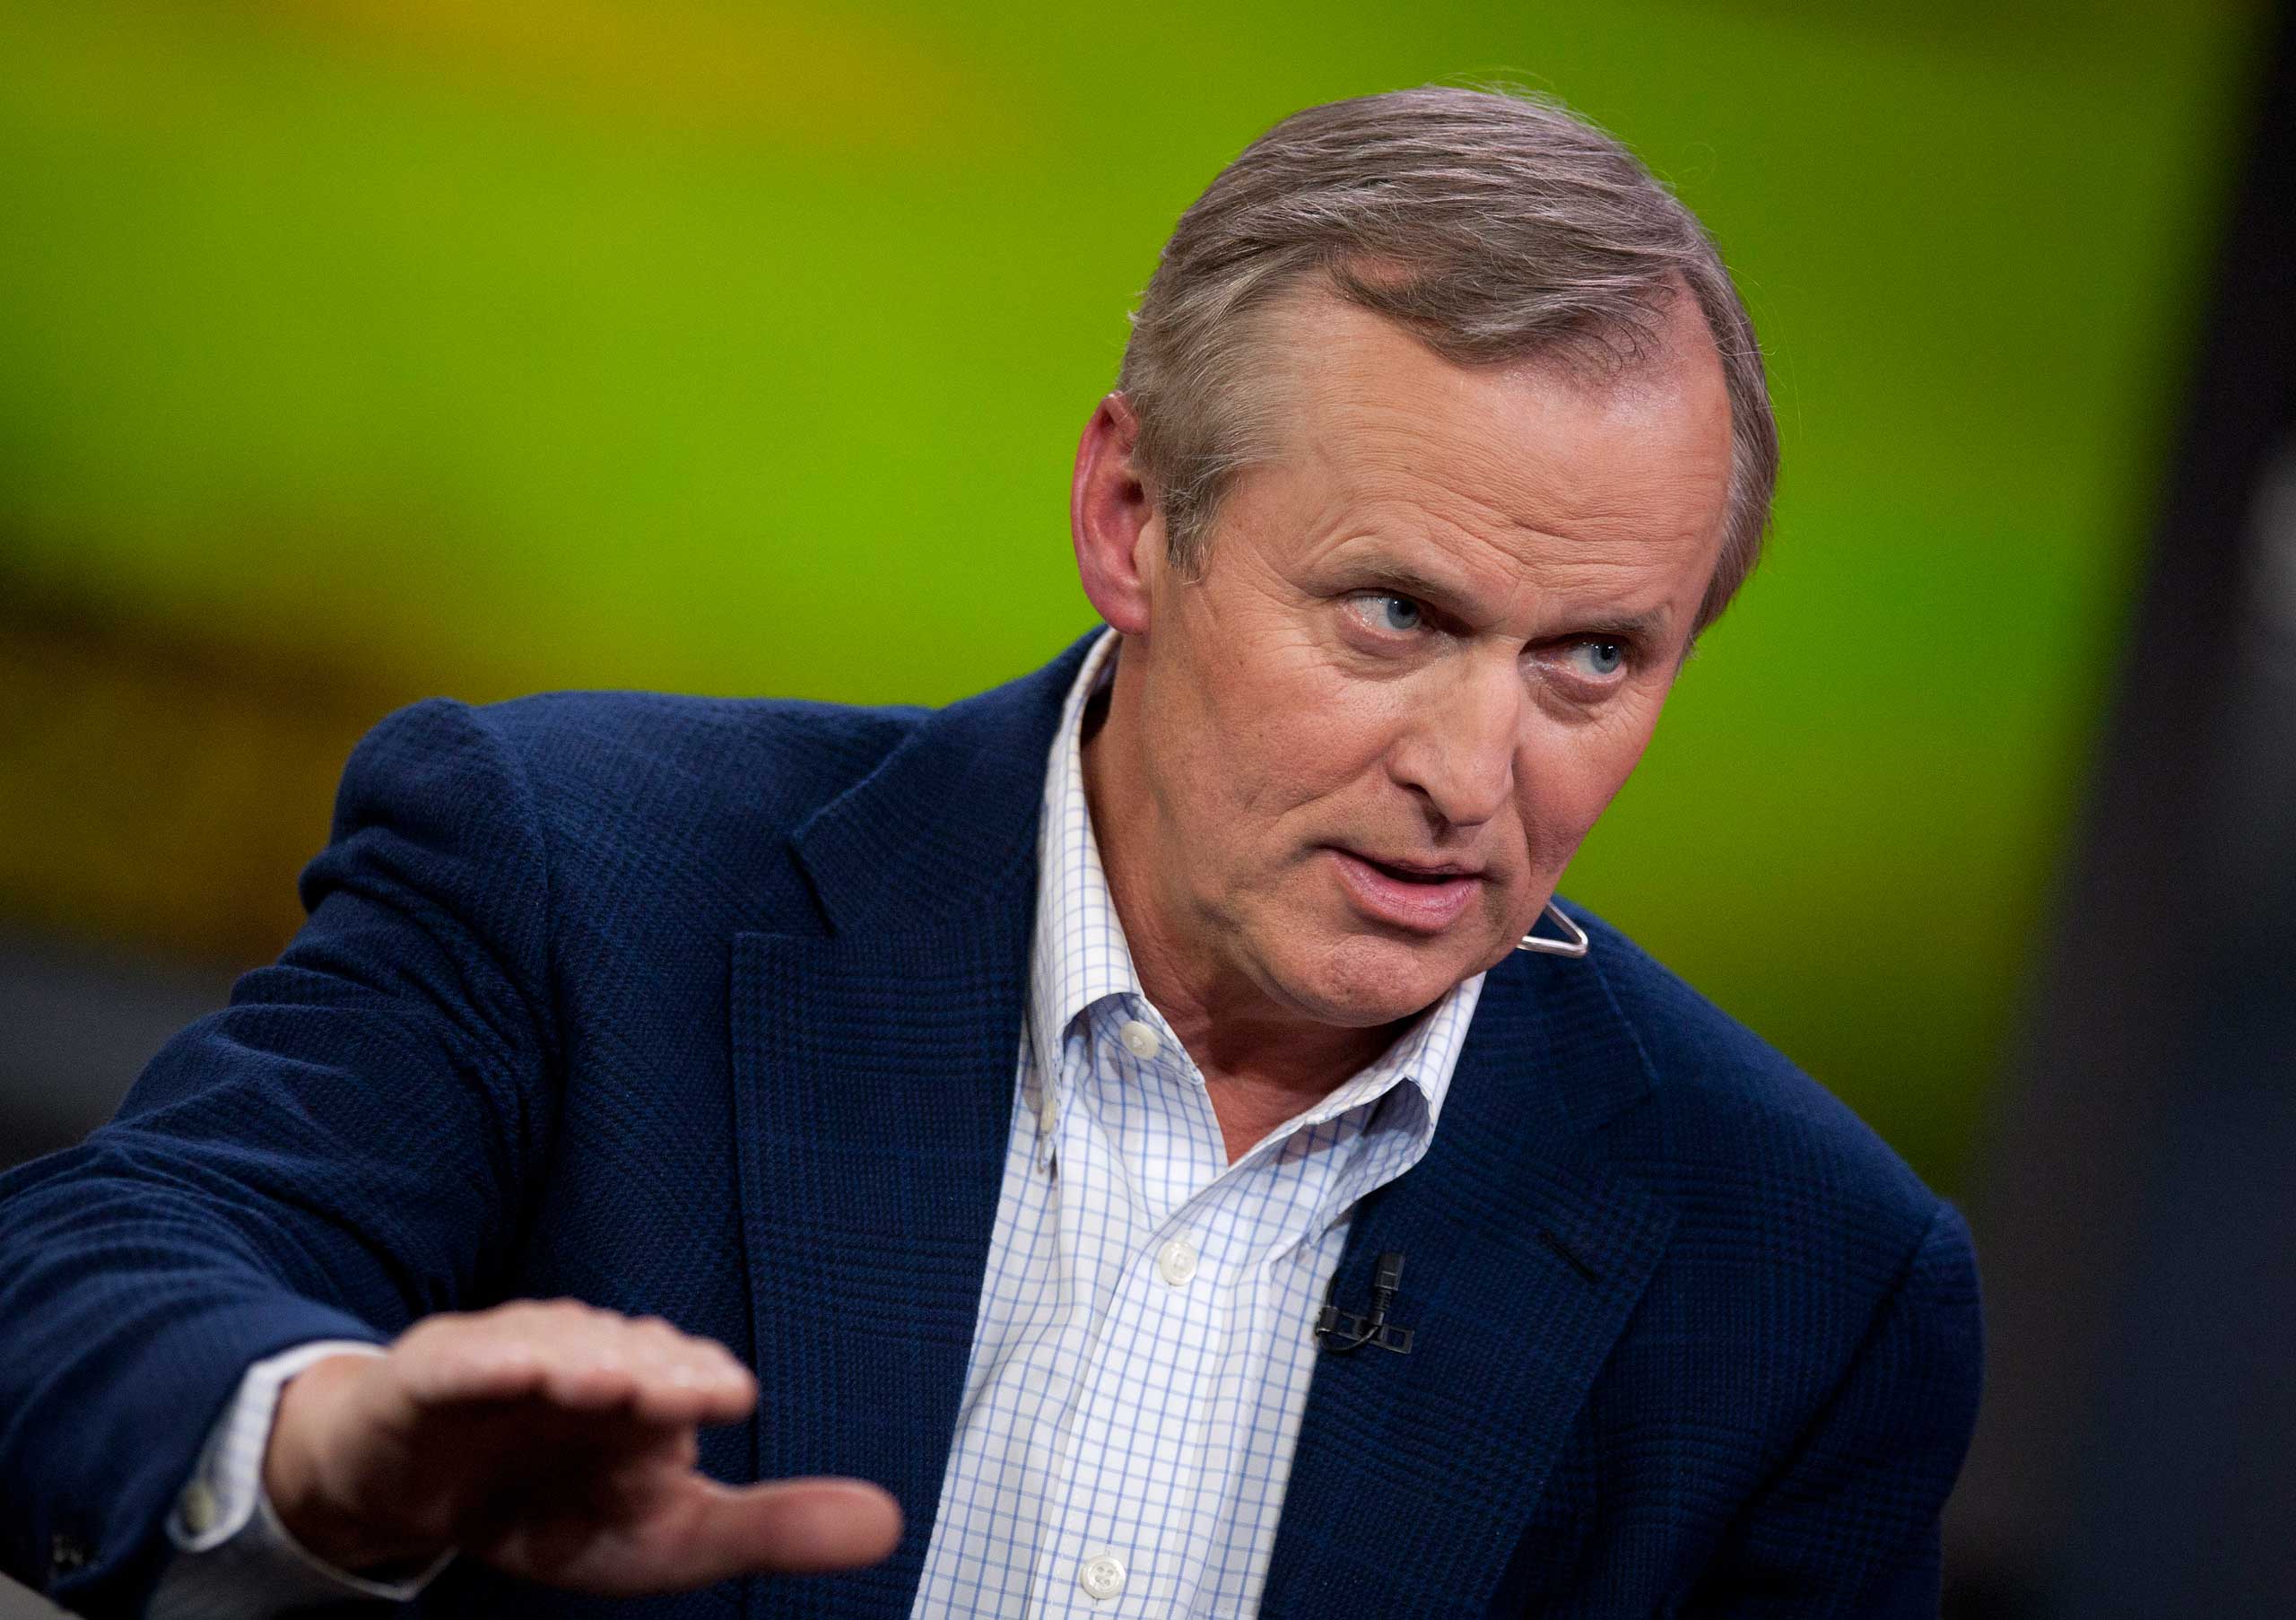 John Grisham speaks during a television interview in New York in 2012. (Scott Eells—Bloomberg/Getty Images)